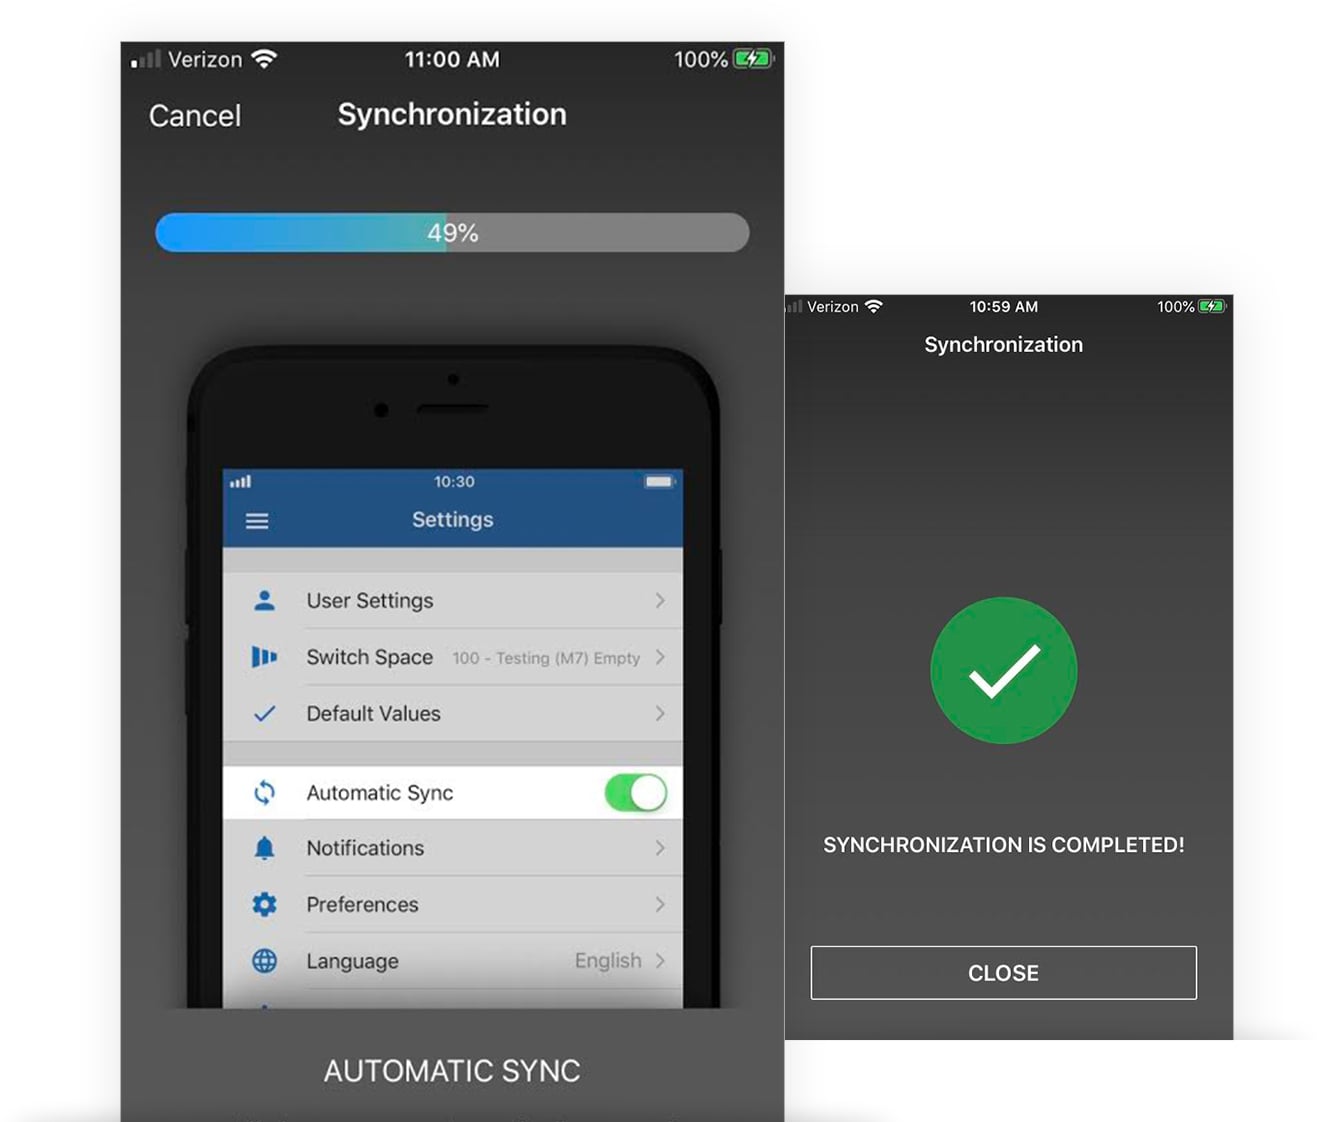 Mobile CRM automatic sync